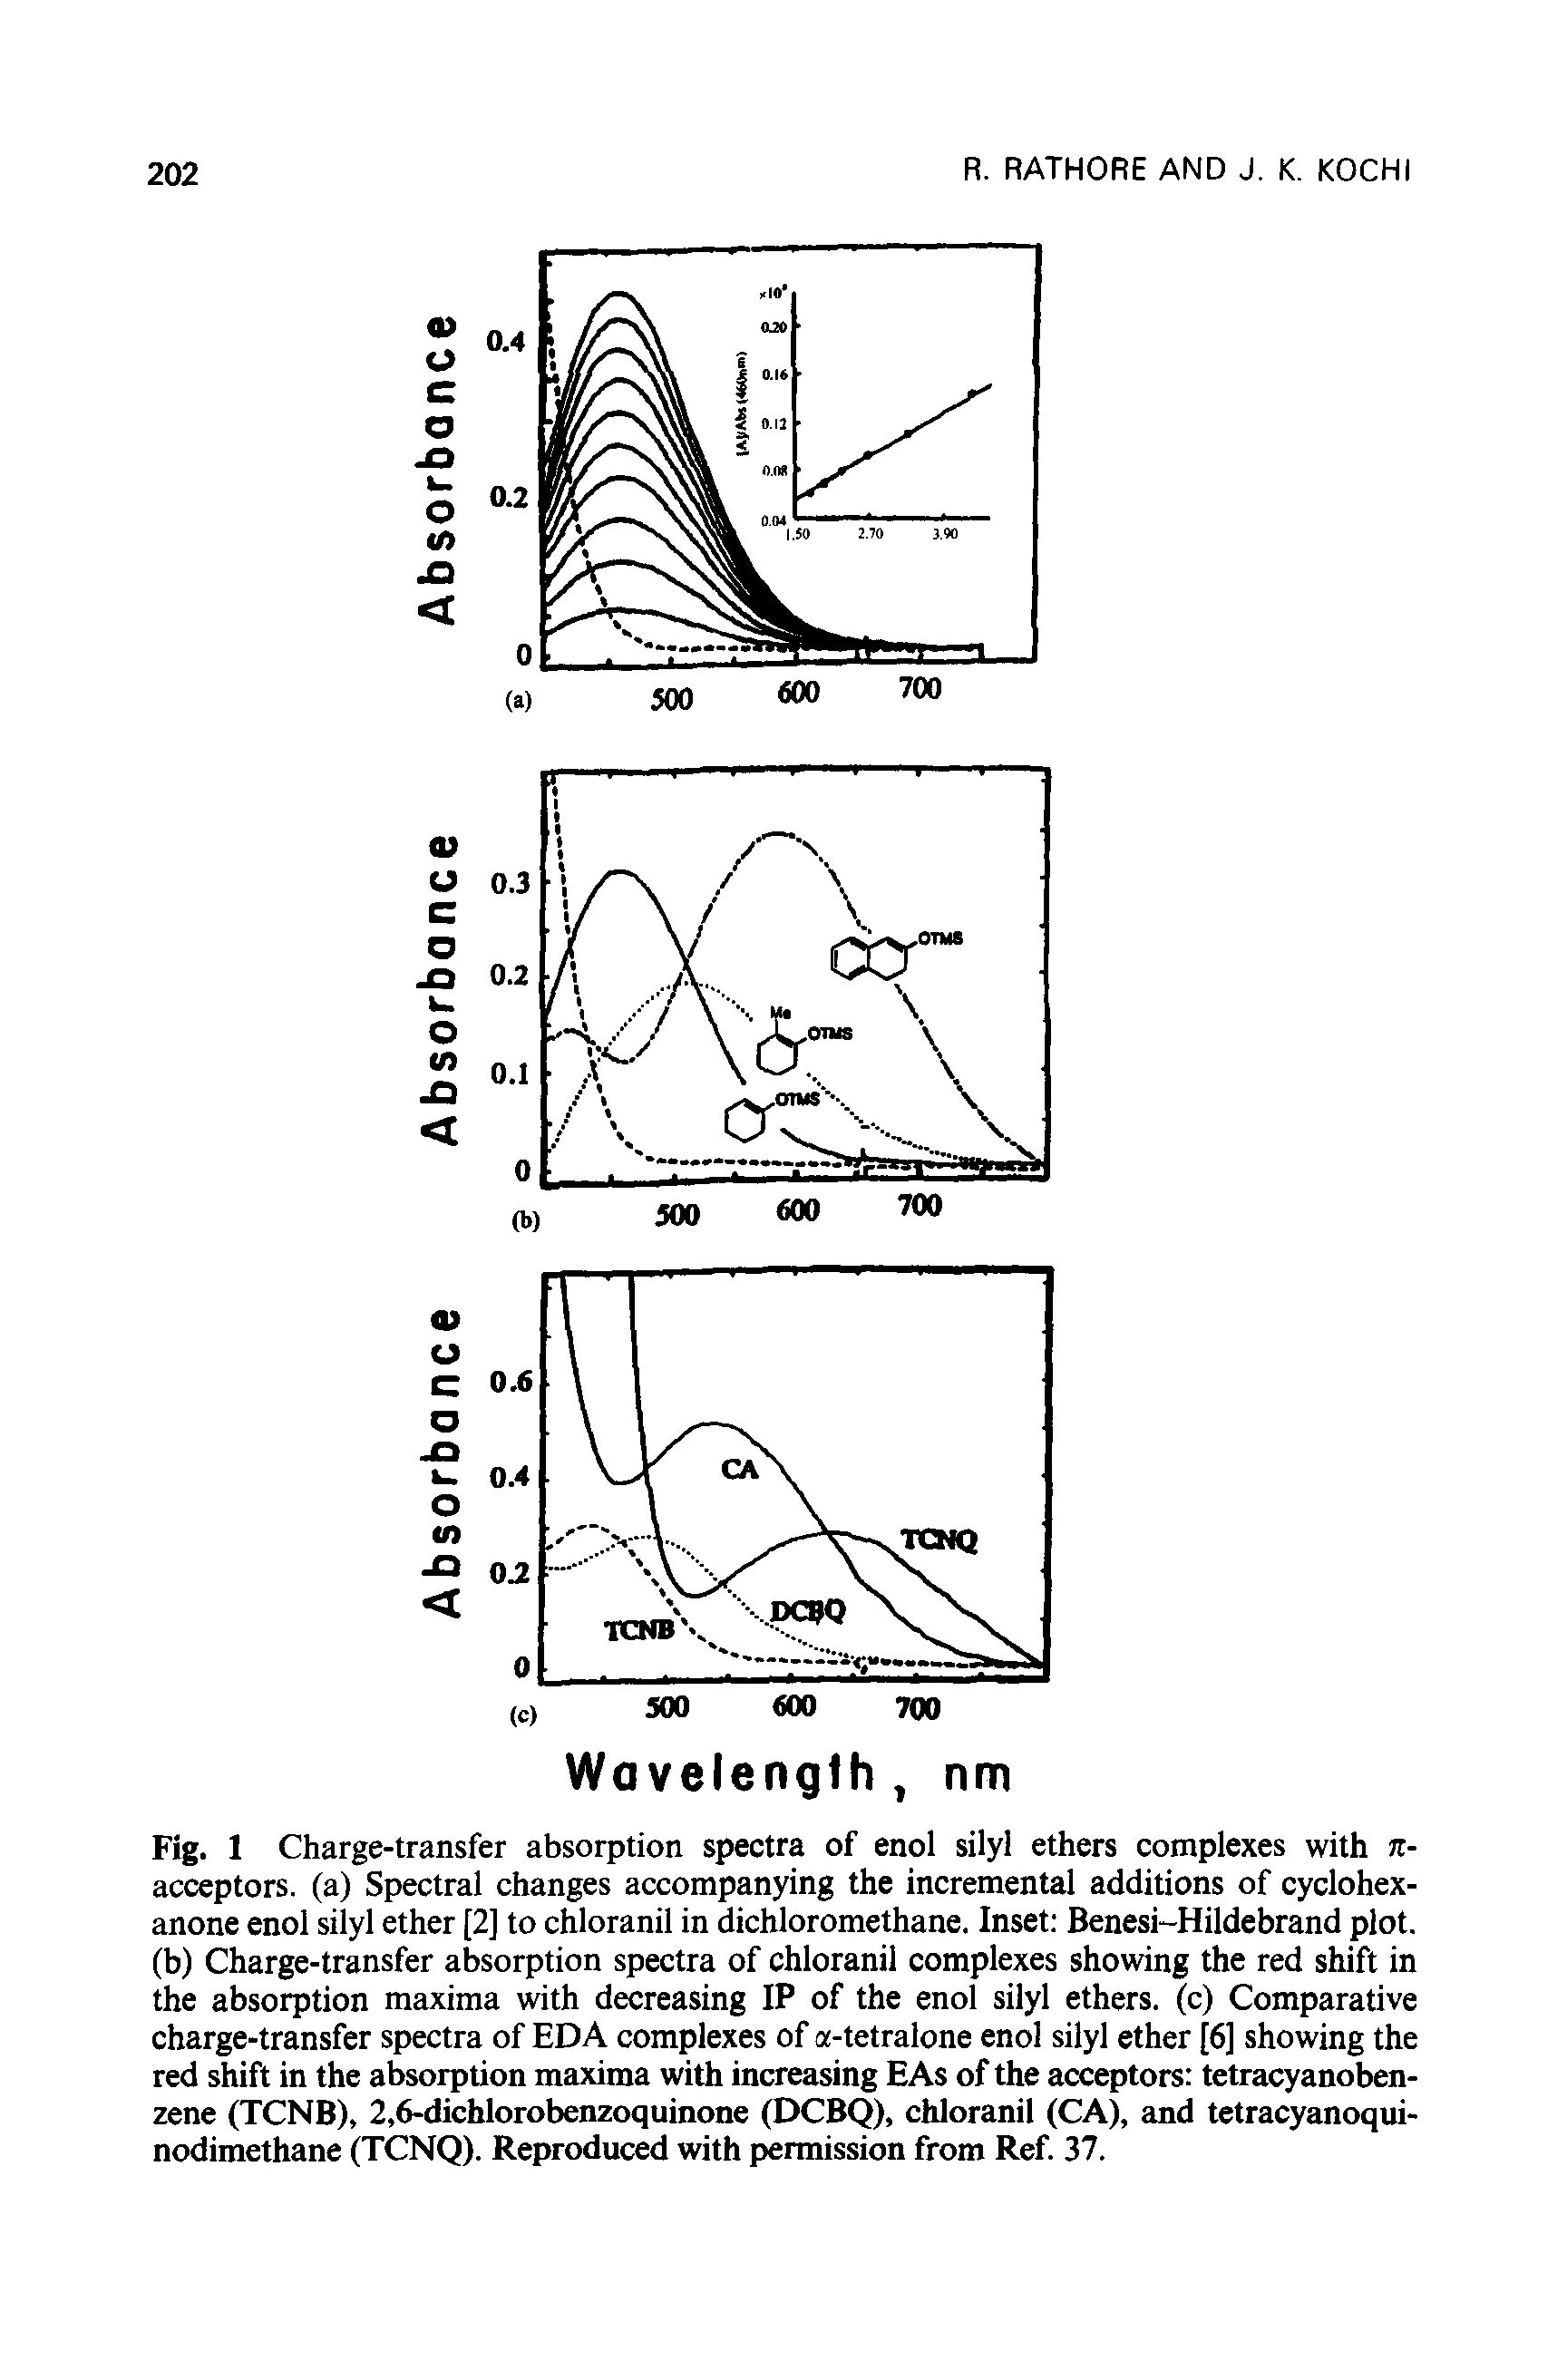 Fig. 1 Charge-transfer absorption spectra of enol silyl ethers complexes with re-acceptors. (a) Spectral changes accompanying the incremental additions of cyclohexanone enol silyl ether [2] to chloranil in dichloromethane. Inset Benesi-Hildebrand plot, (b) Charge-transfer absorption spectra of chloranil complexes showing the red shift in the absorption maxima with decreasing IP of the enol silyl ethers, (c) Comparative charge-transfer spectra of EDA complexes of a-tetralone enol silyl ether [6] showing the red shift in the absorption maxima with increasing EAs of the acceptors tetracyanoben-zene (TCNB), 2,6-dichlorobenzoquinone (DCBQ), chloranil (CA), and tetracyanoqui-nodimethane (TCNQ). Reproduced with permission from Ref. 37.